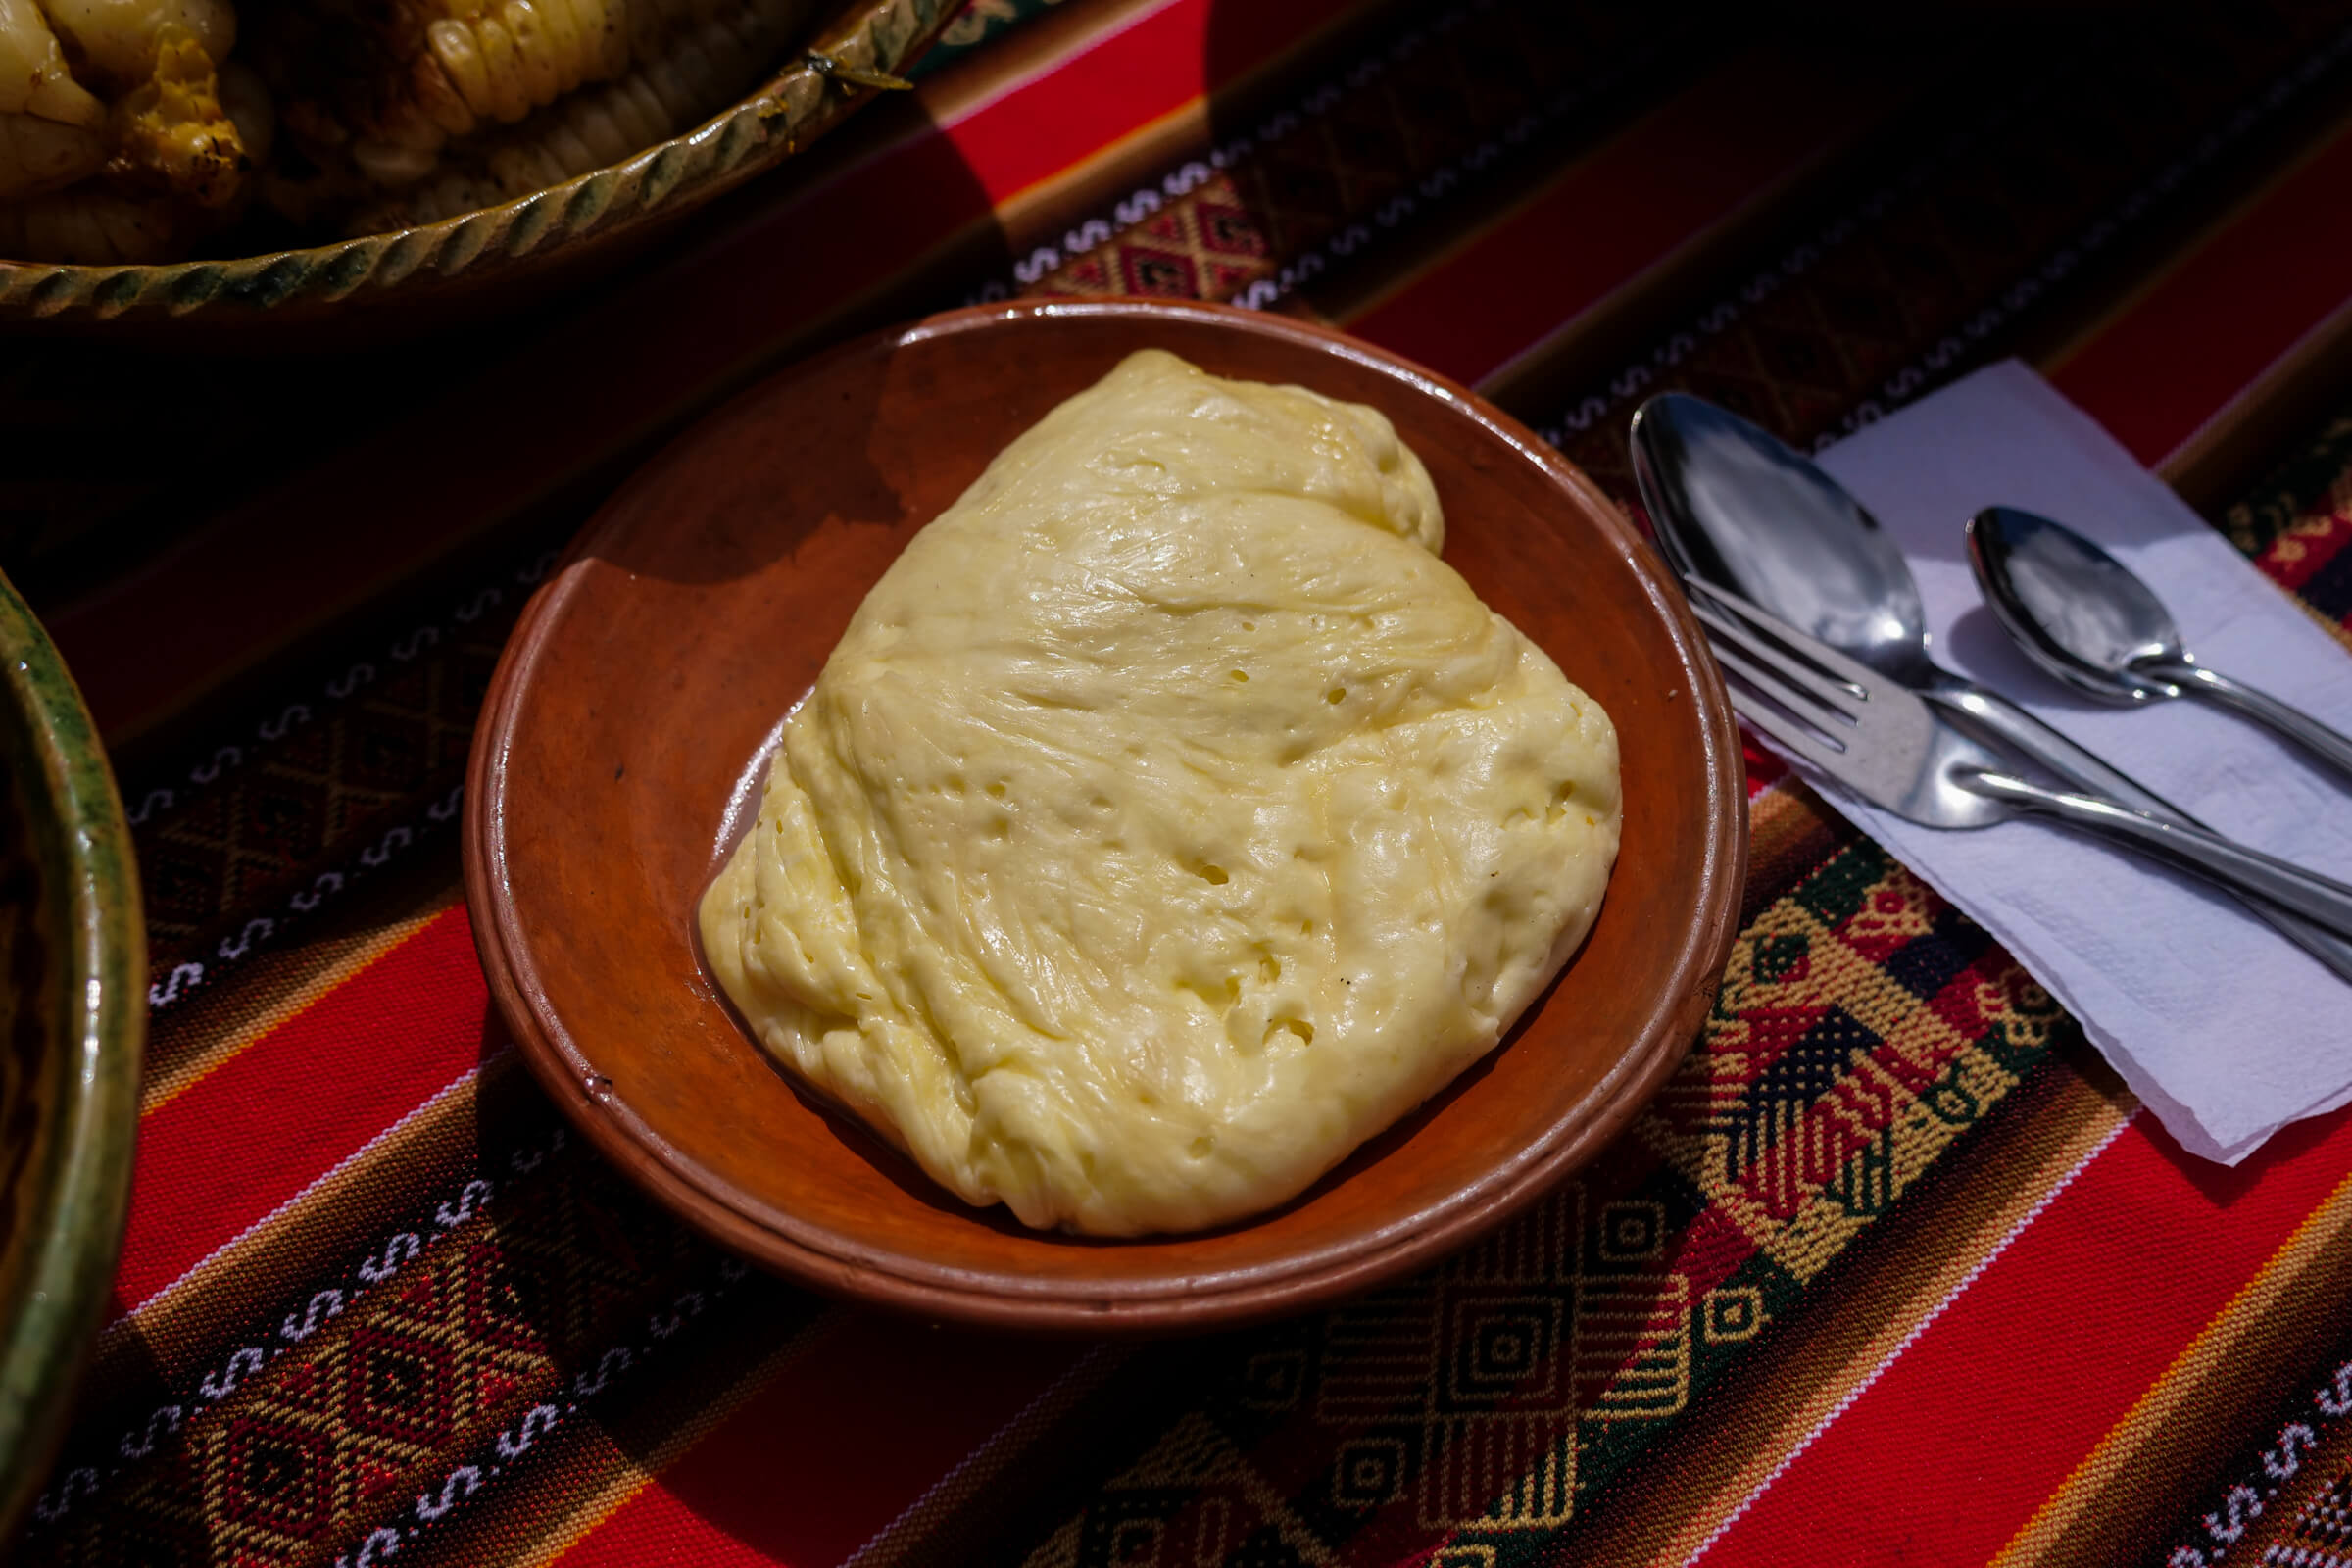 mild cheese is enjoyed in many South American locations, including the high country in Peru